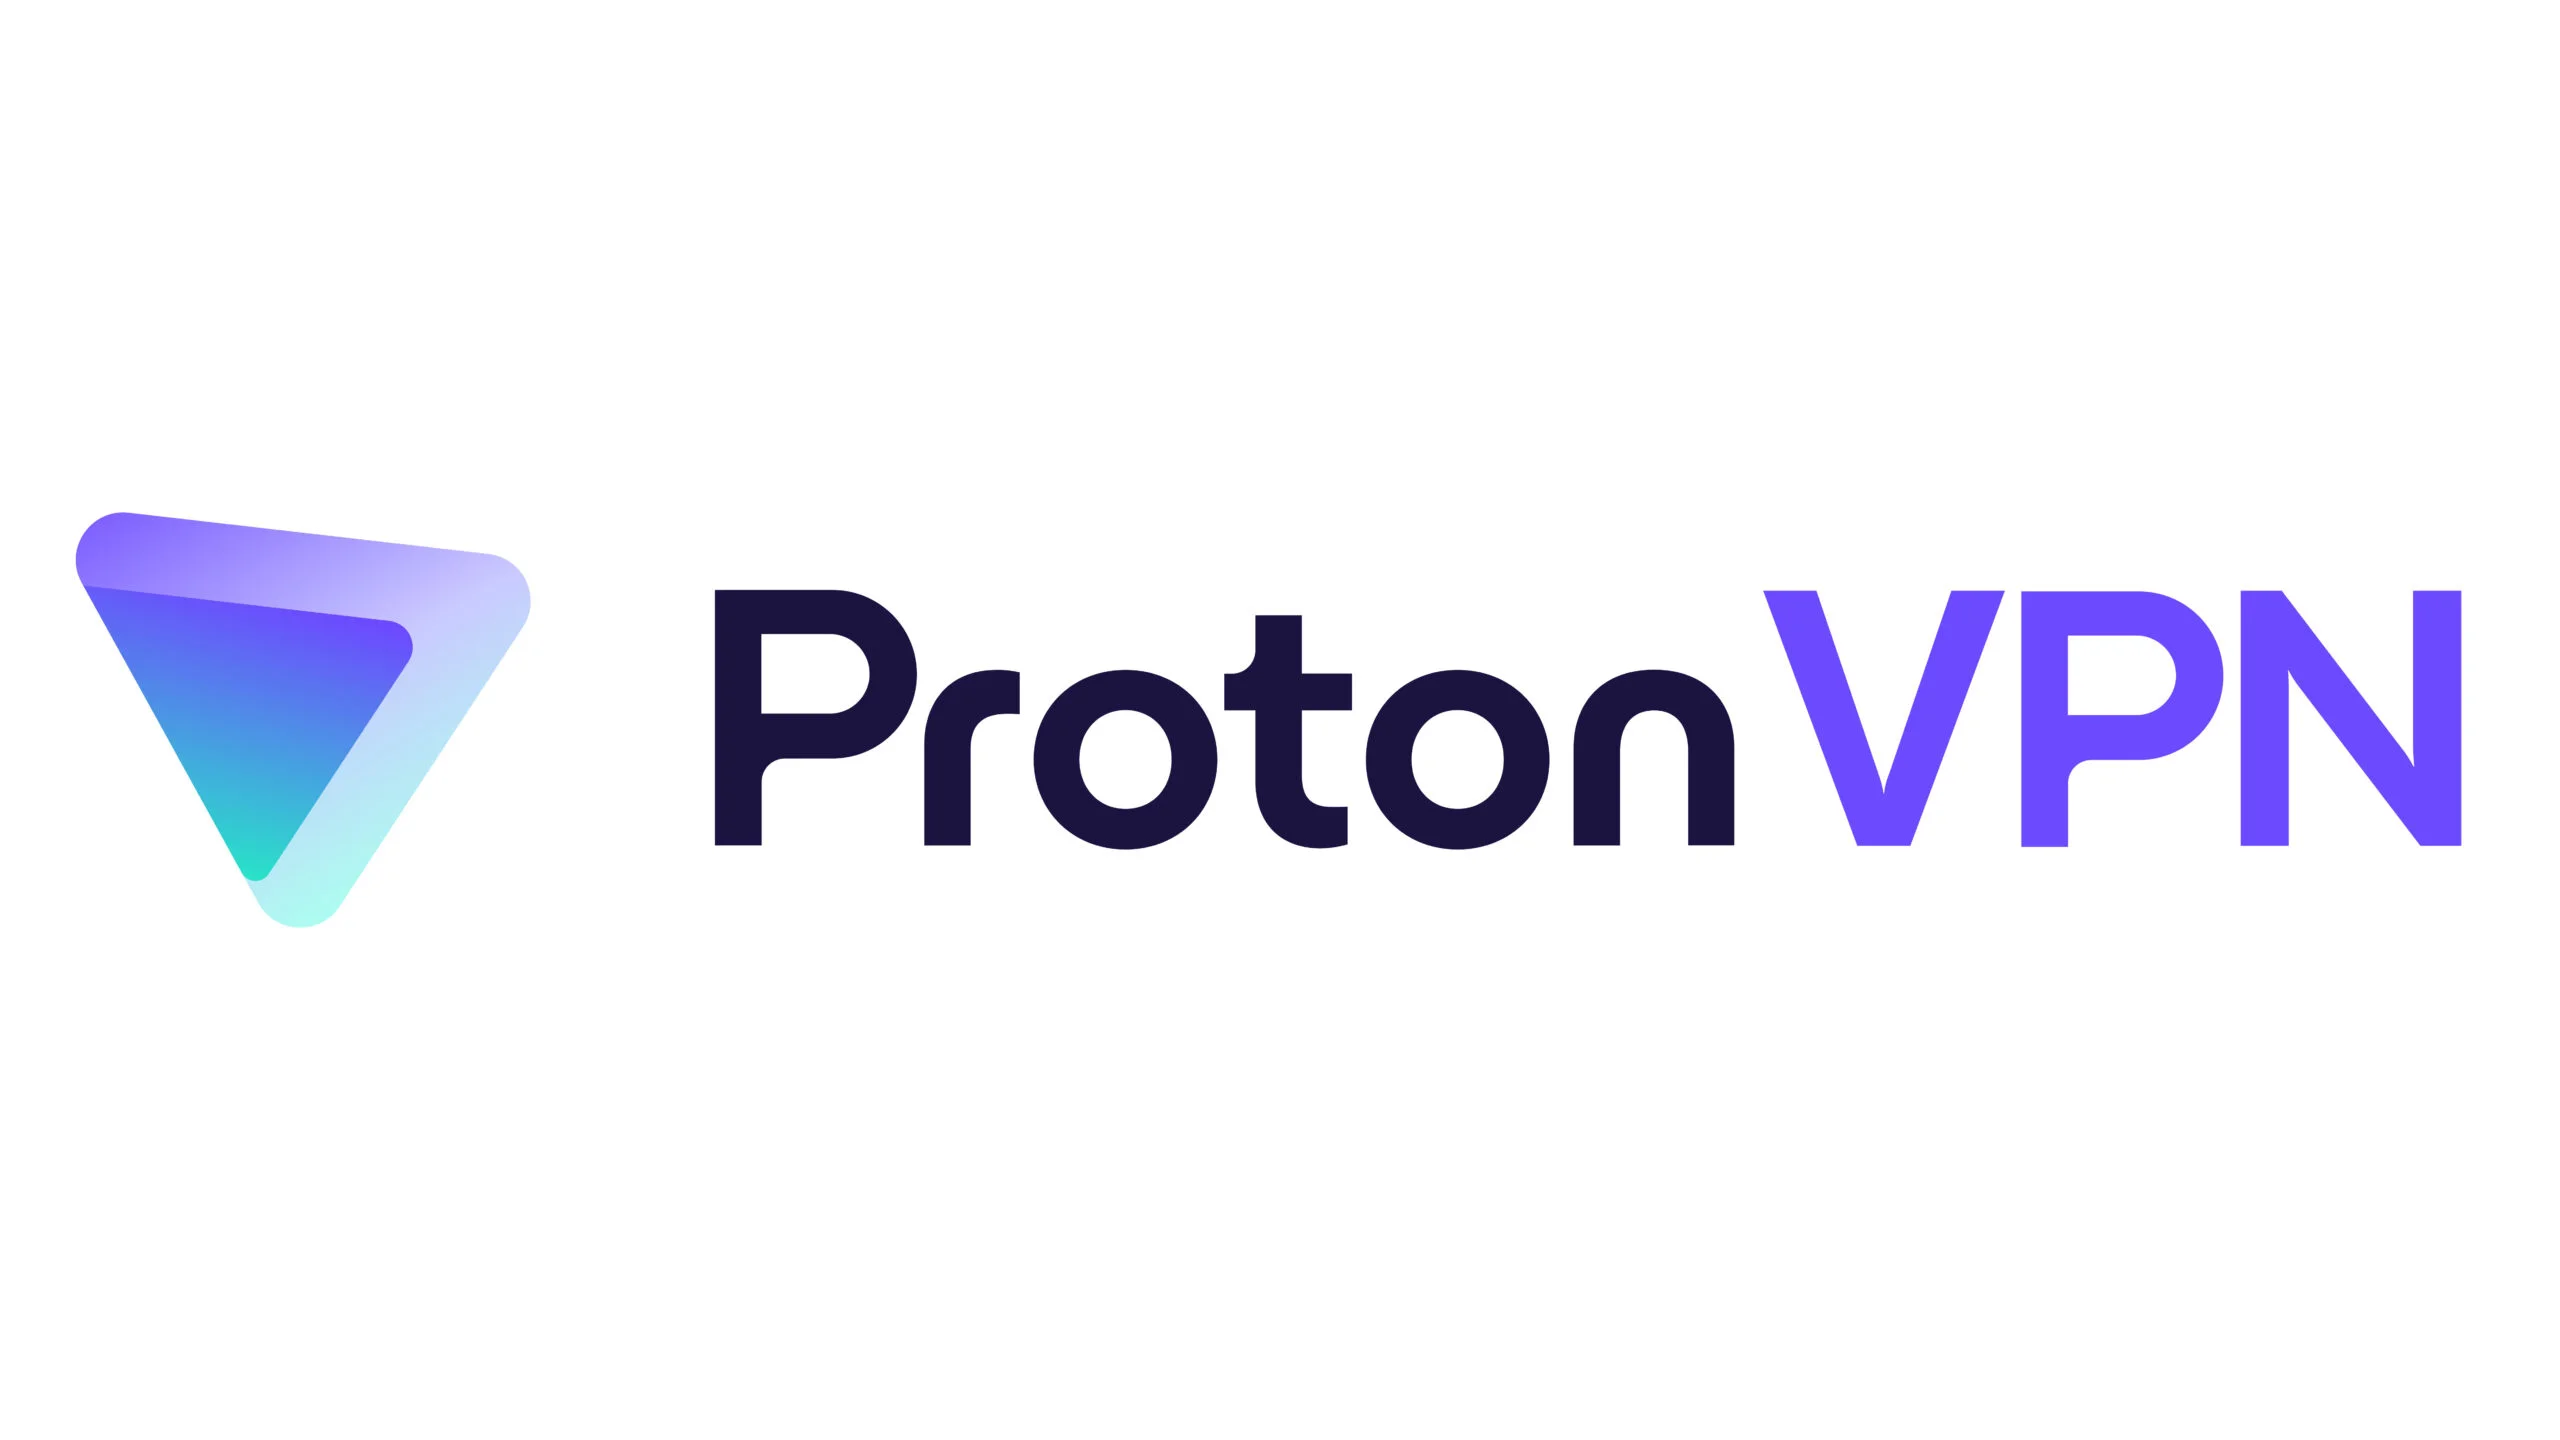 Proton VPN with best vpn services and maybe unlimited simultaneous connections